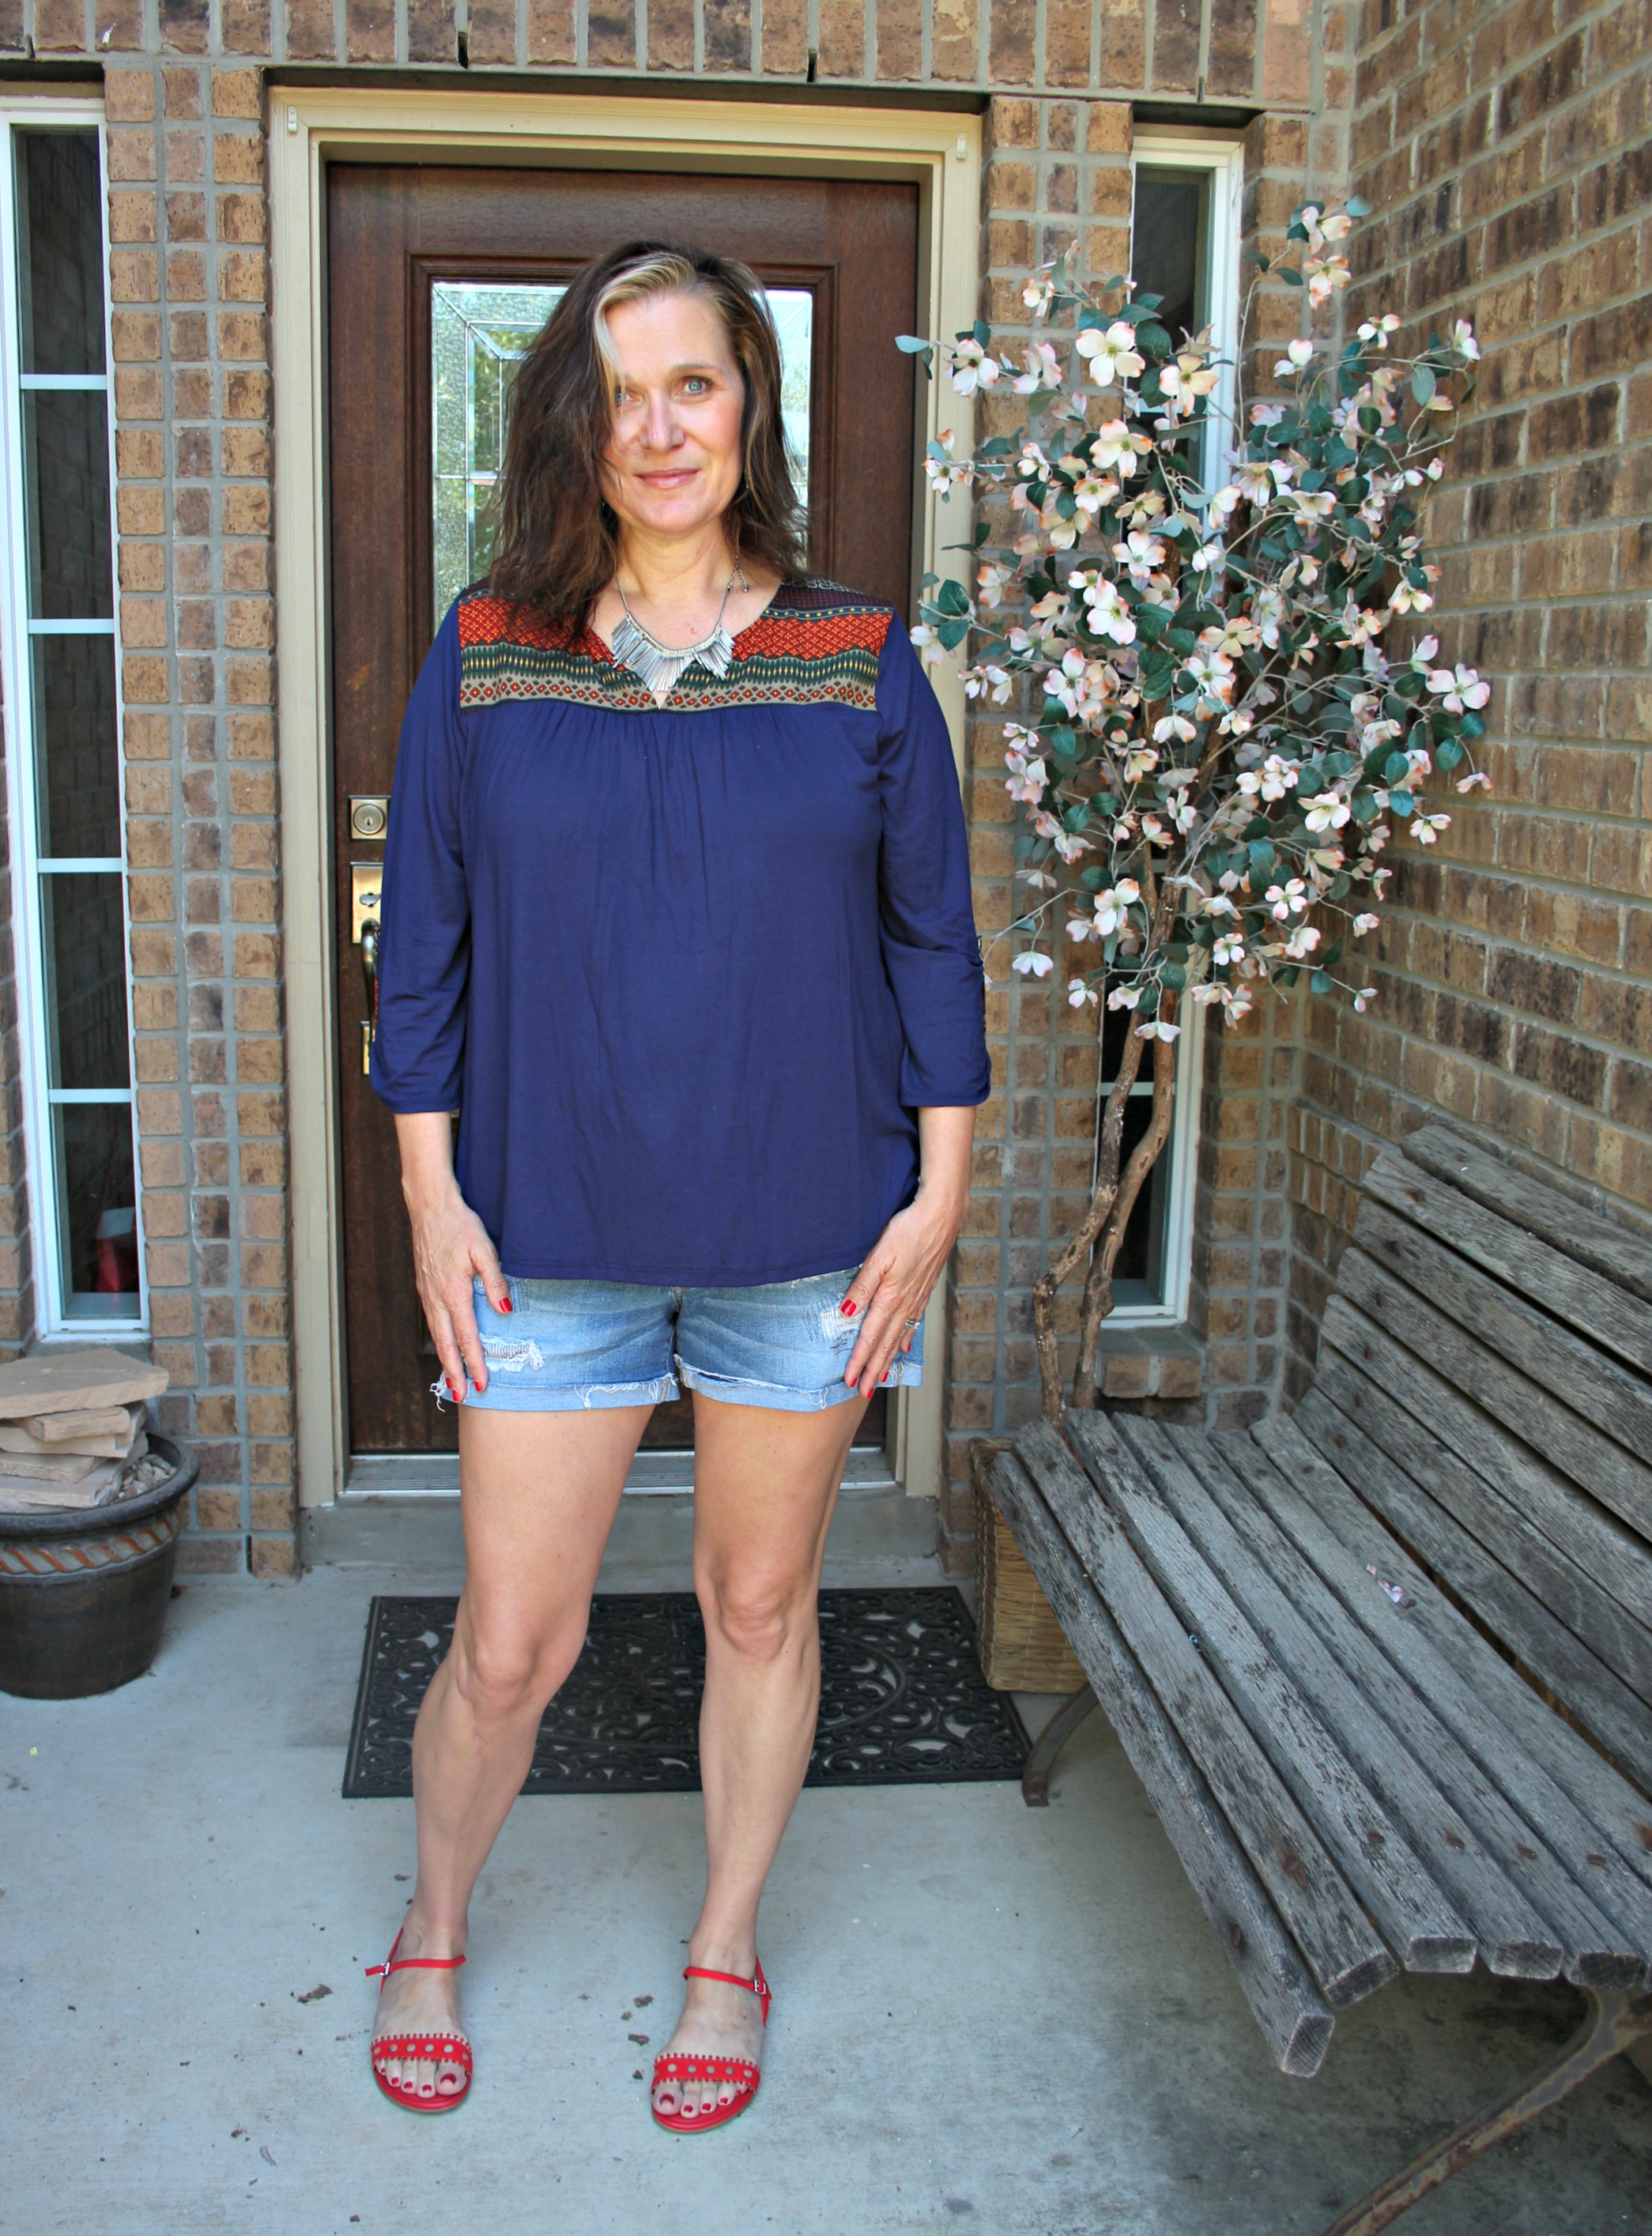 Fashion Friday - The Stitch Fix Box For Spain|RIpped Jeans and Bifocals